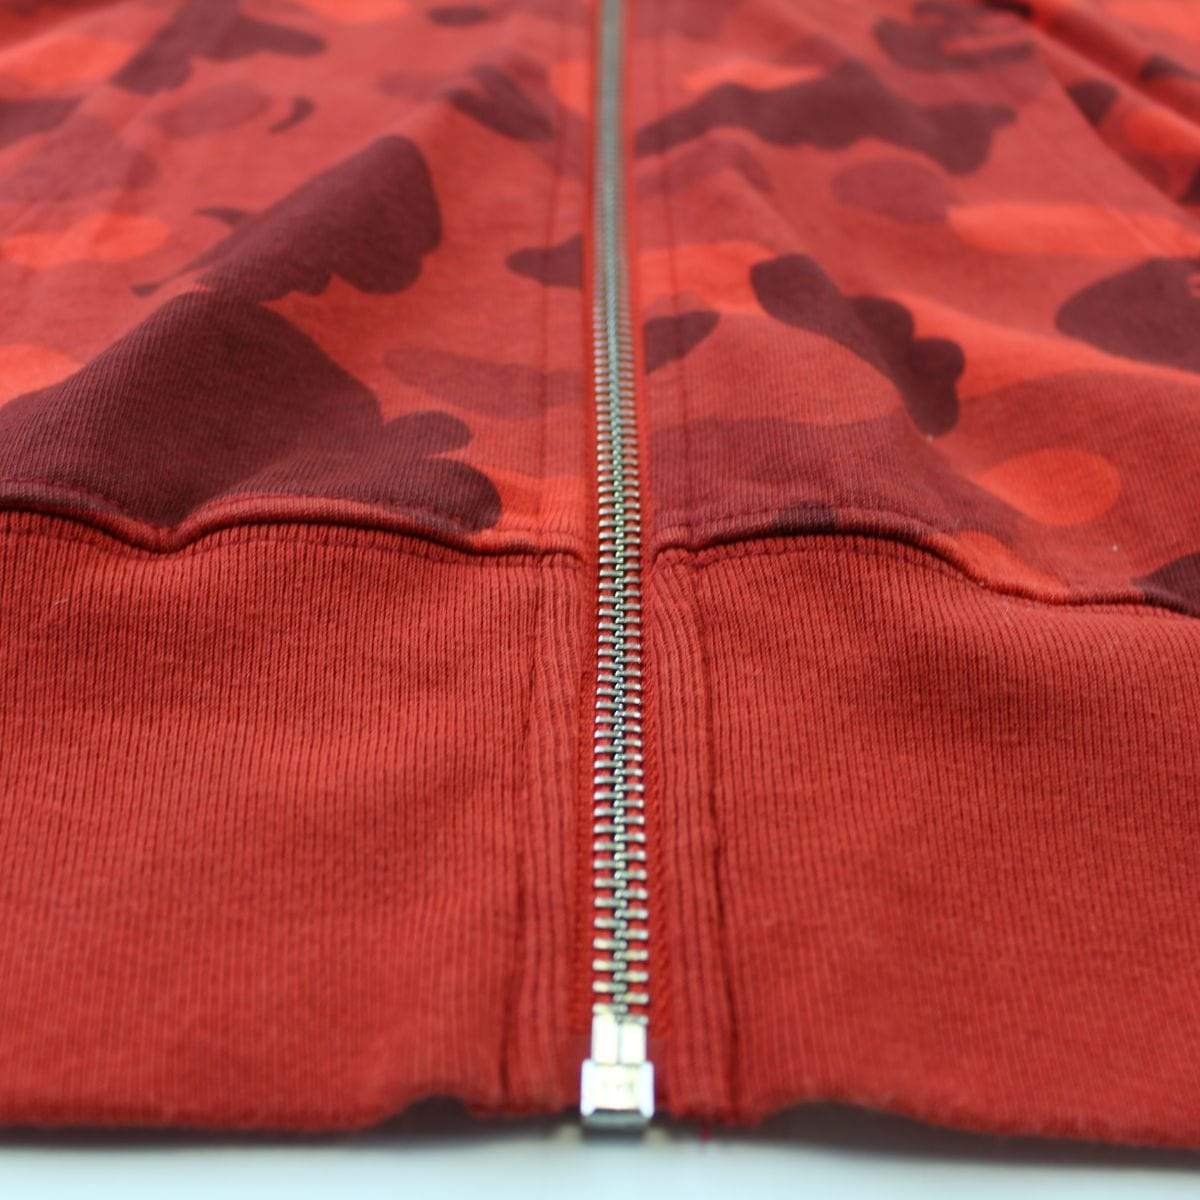 Bape x Champion Red Camo Full Zip Hoodie - SaruGeneral